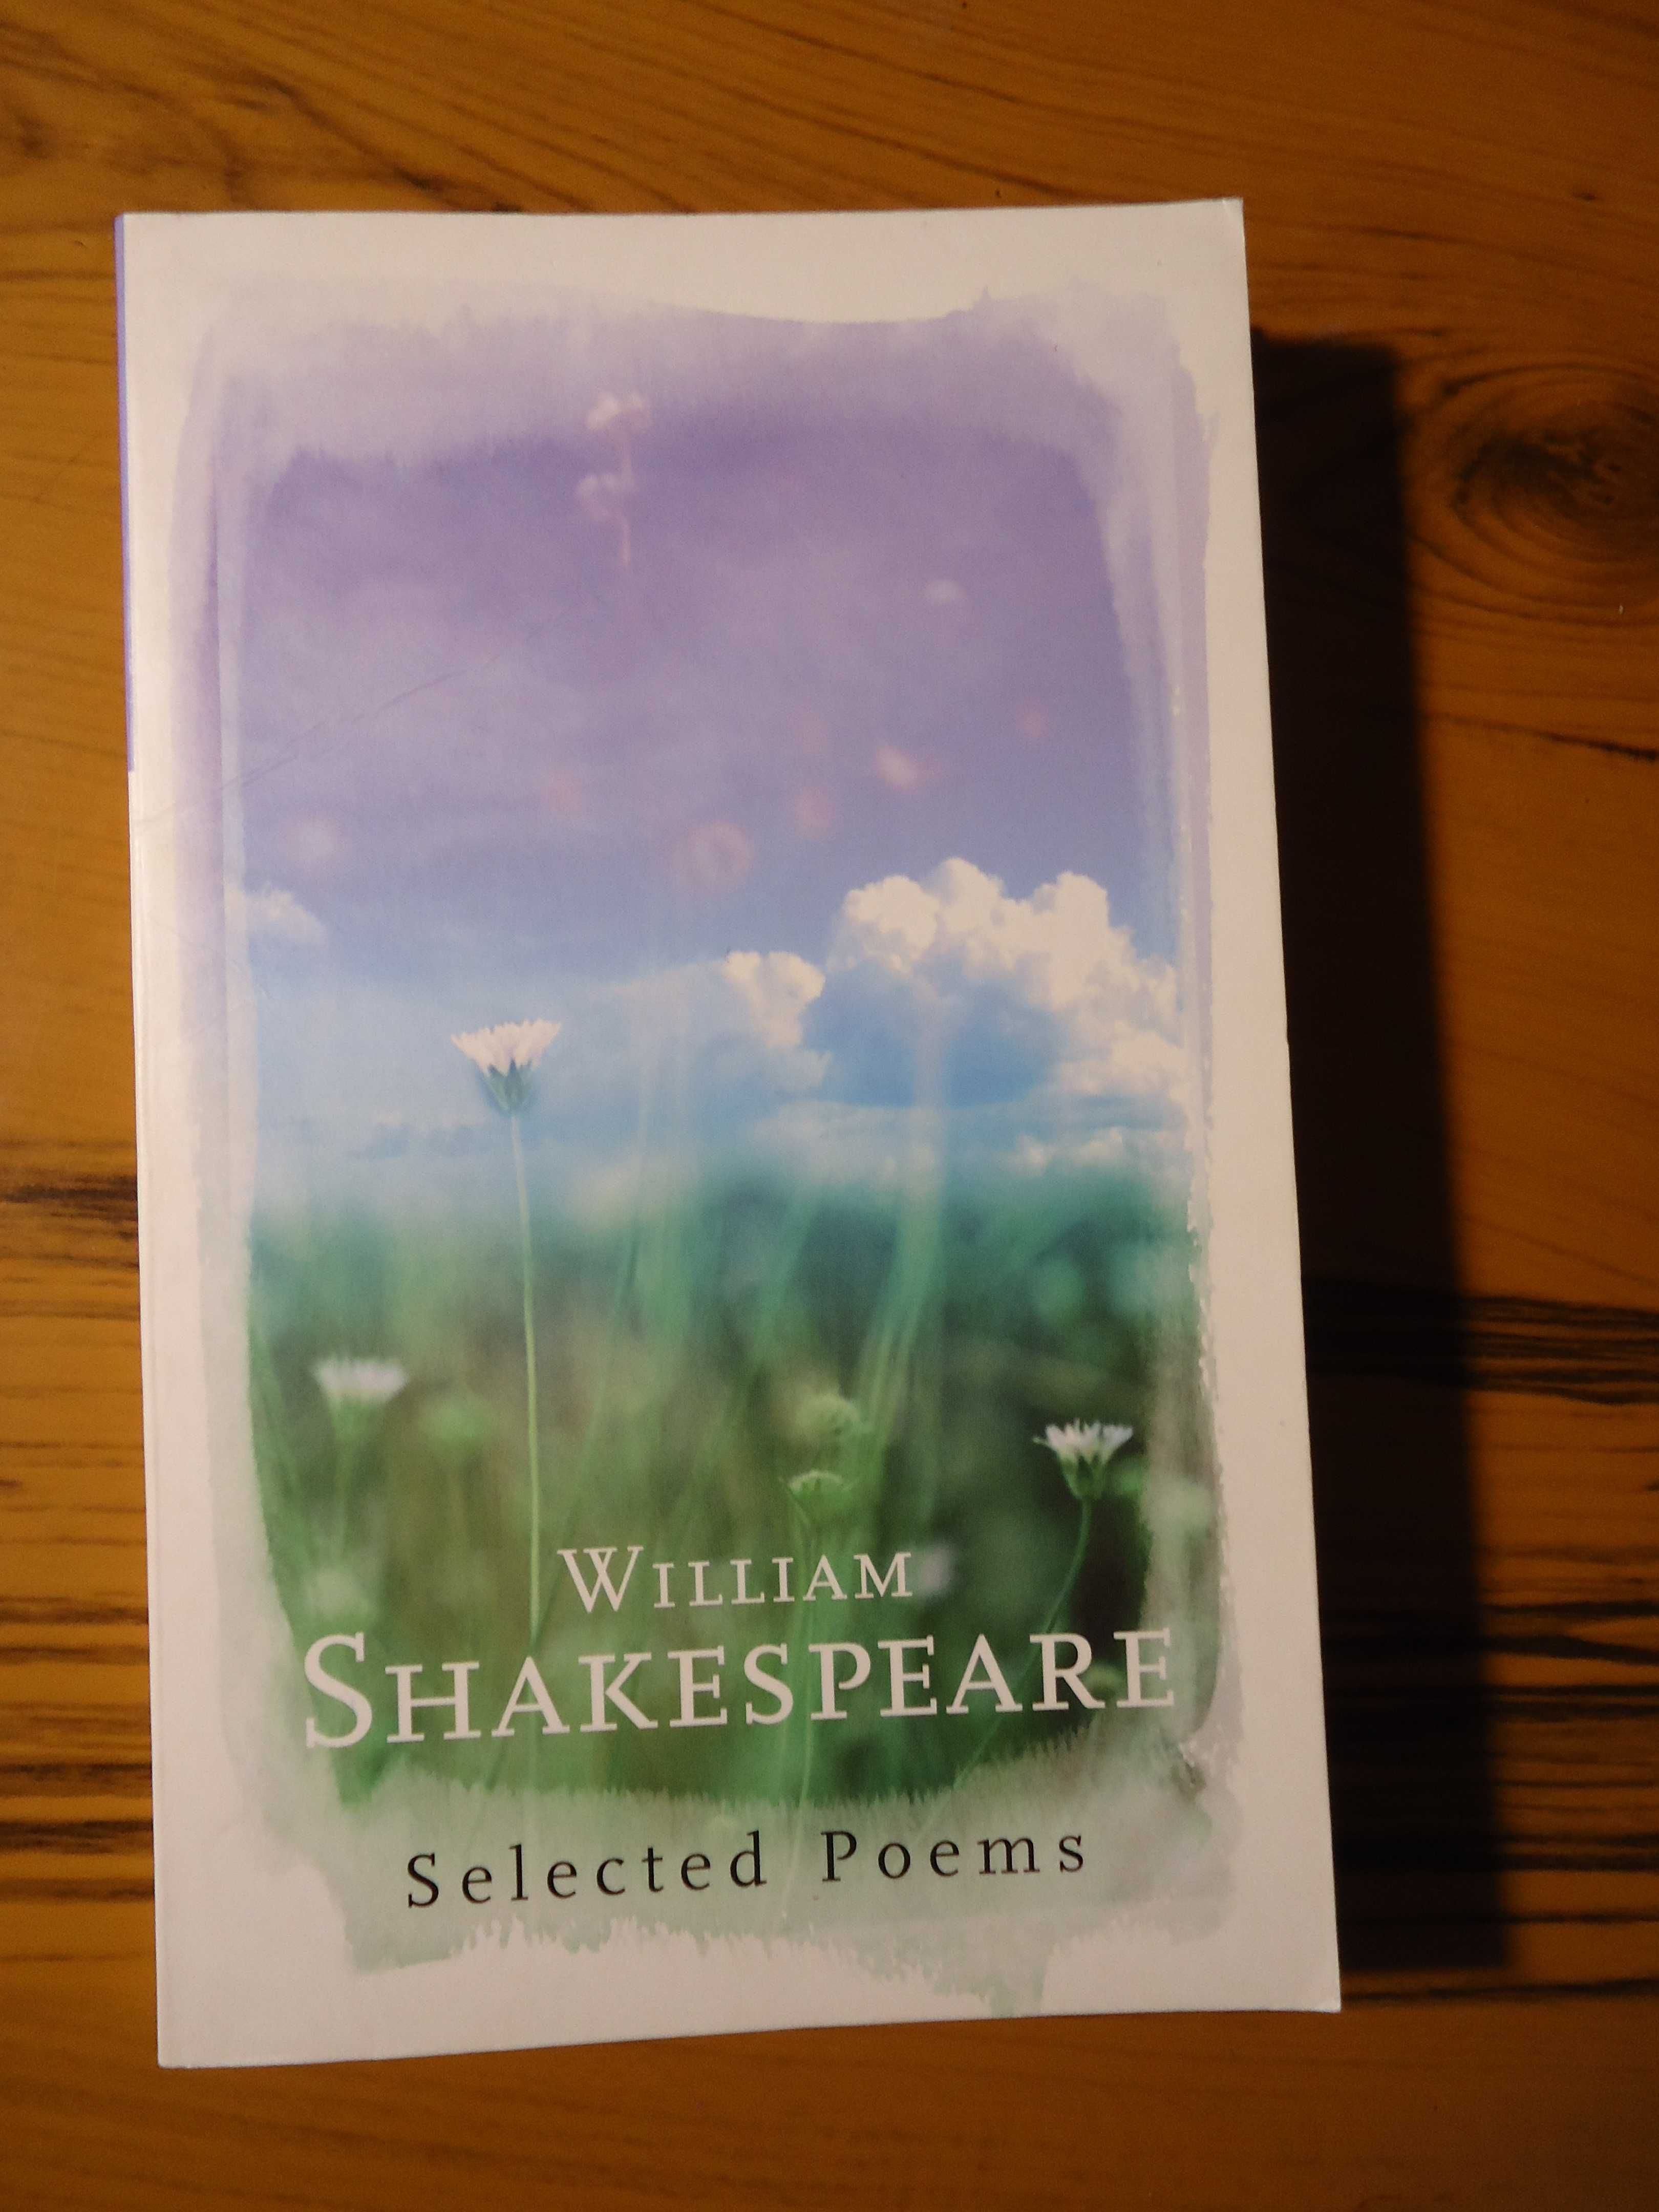 William Shakespeare - Selected Poems